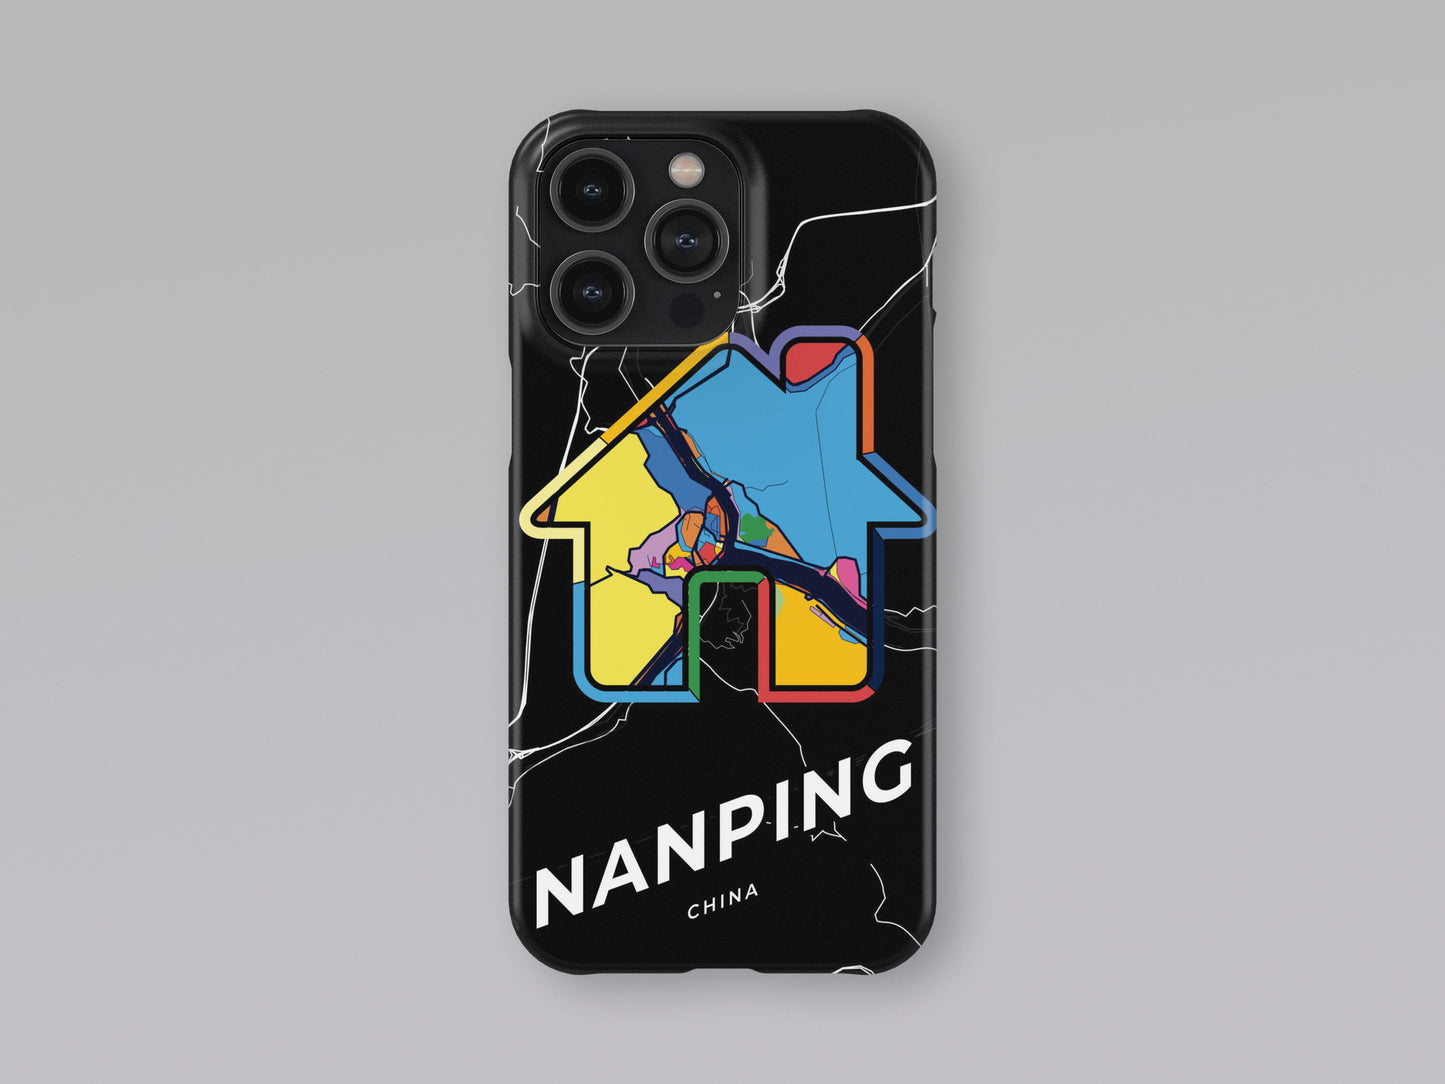 Nanping China slim phone case with colorful icon 3